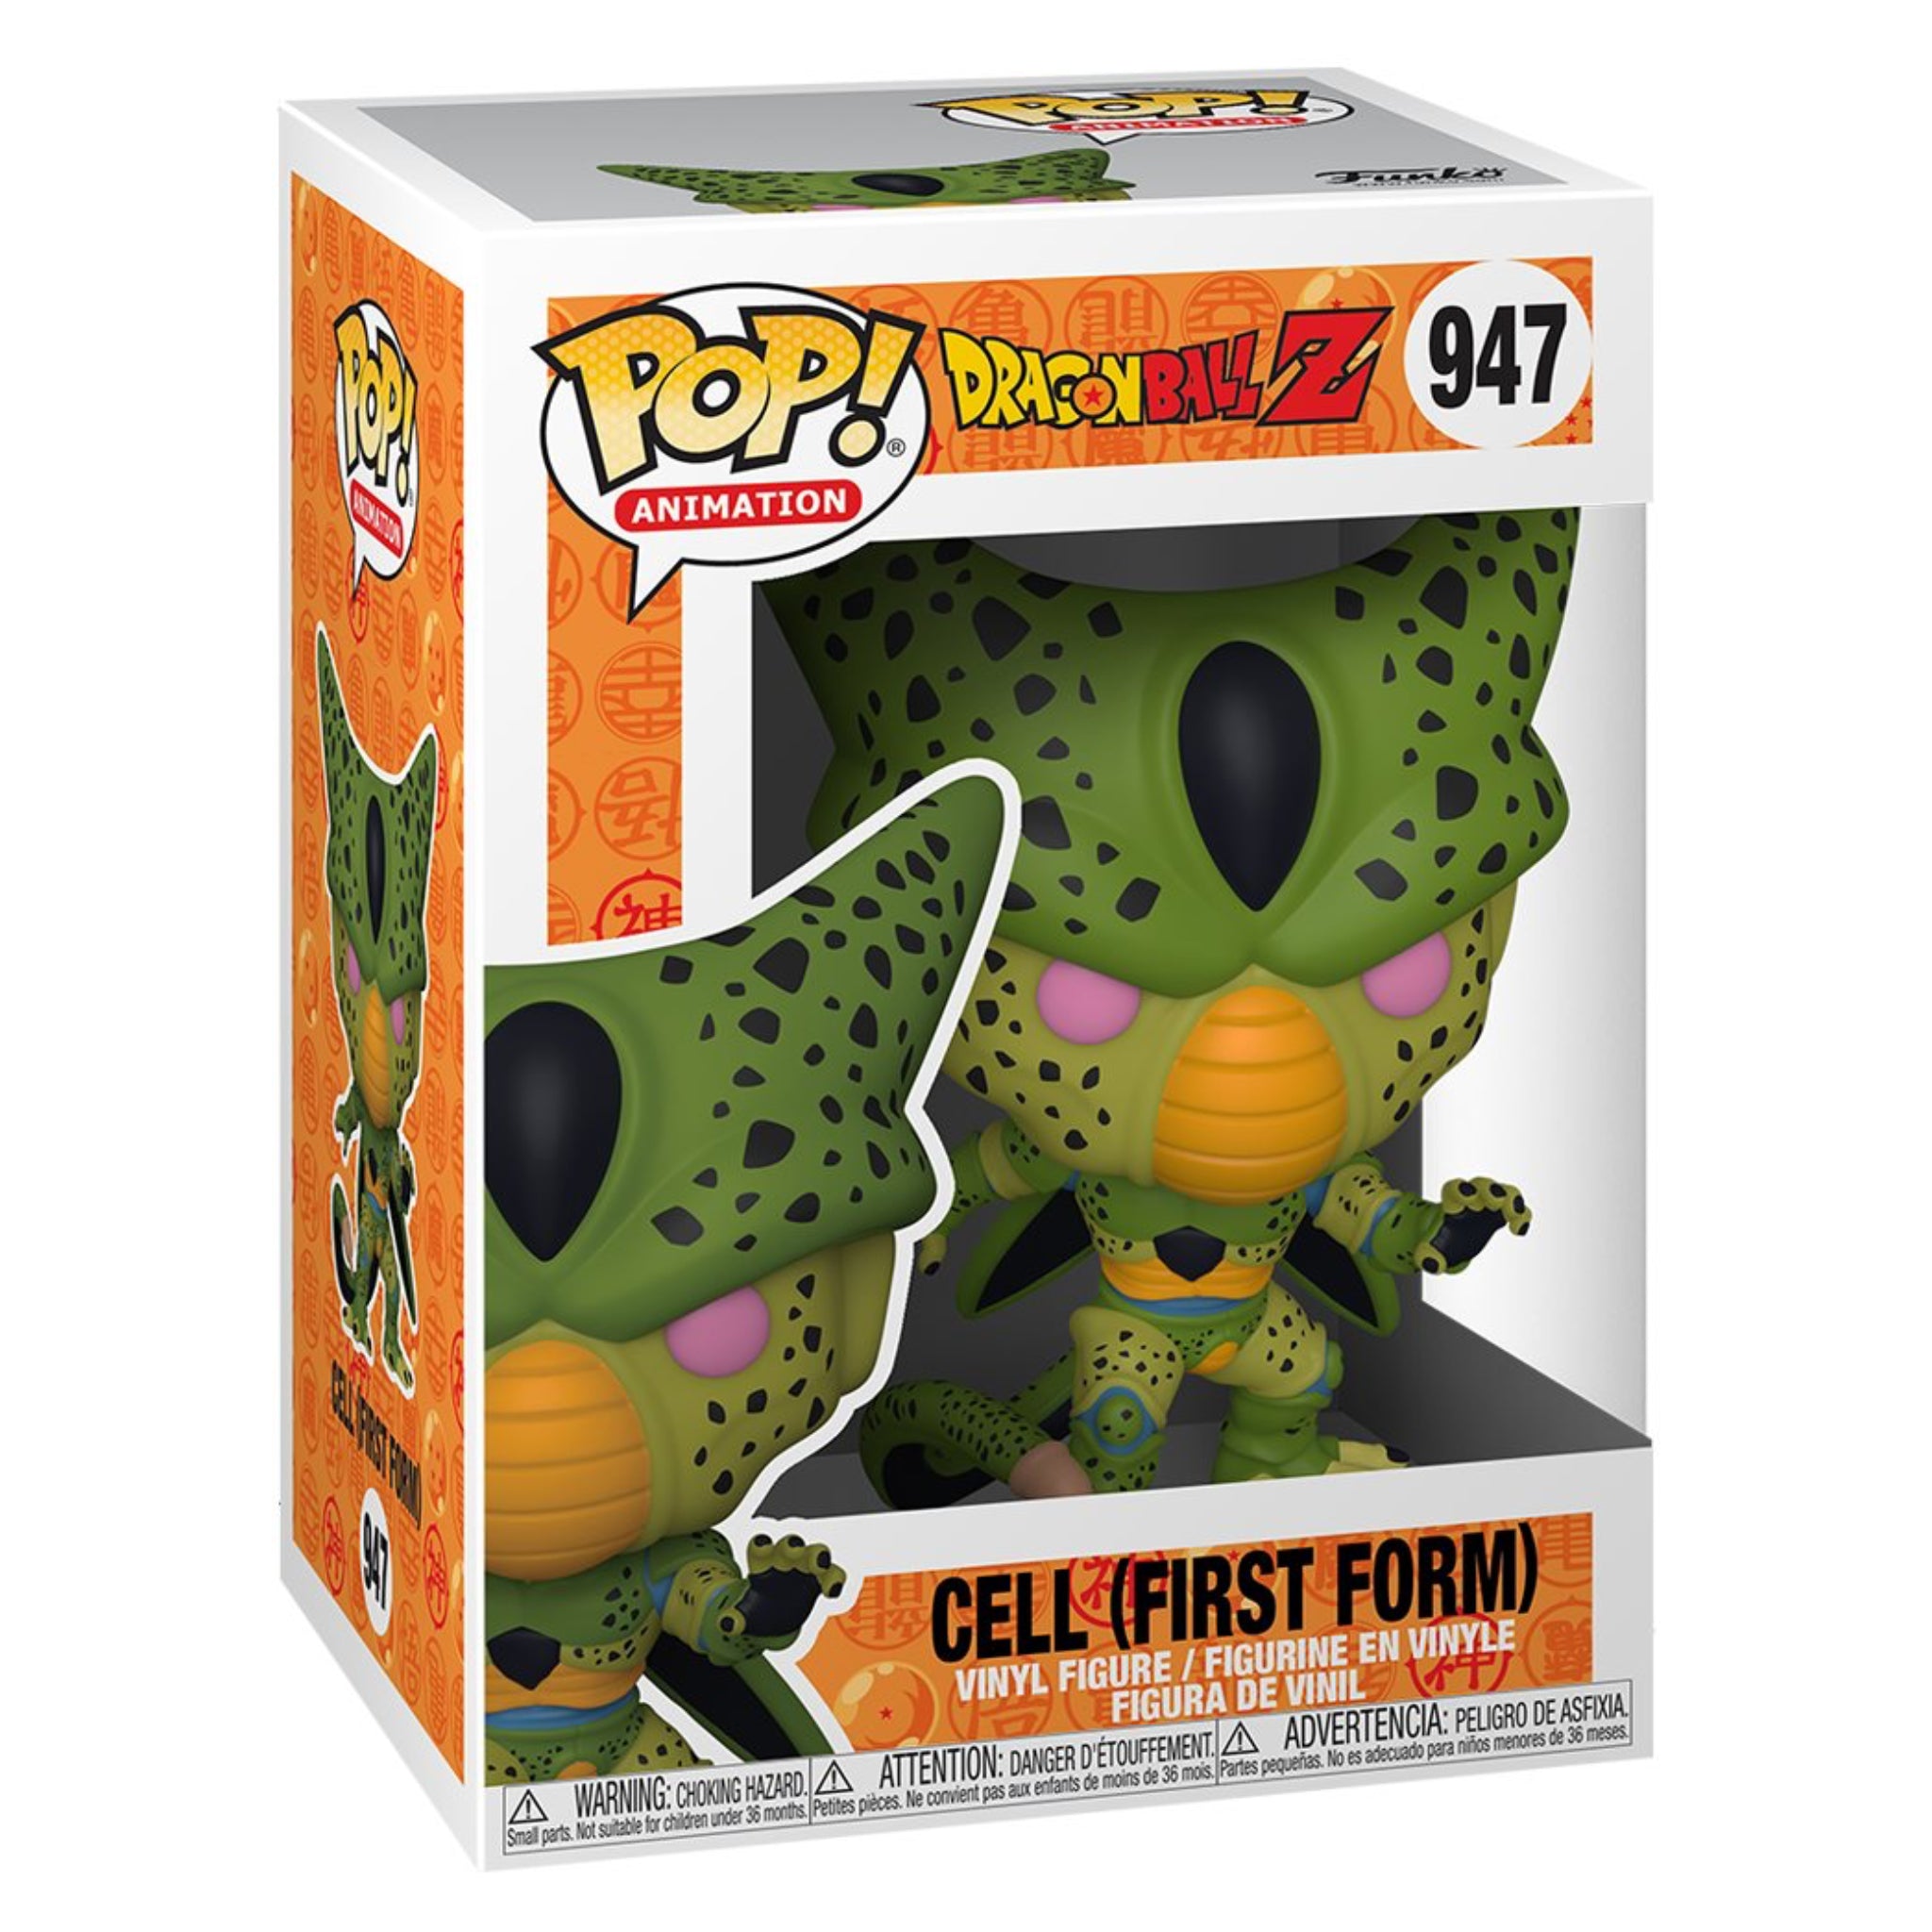 Cell (First Form) Funko Pop!